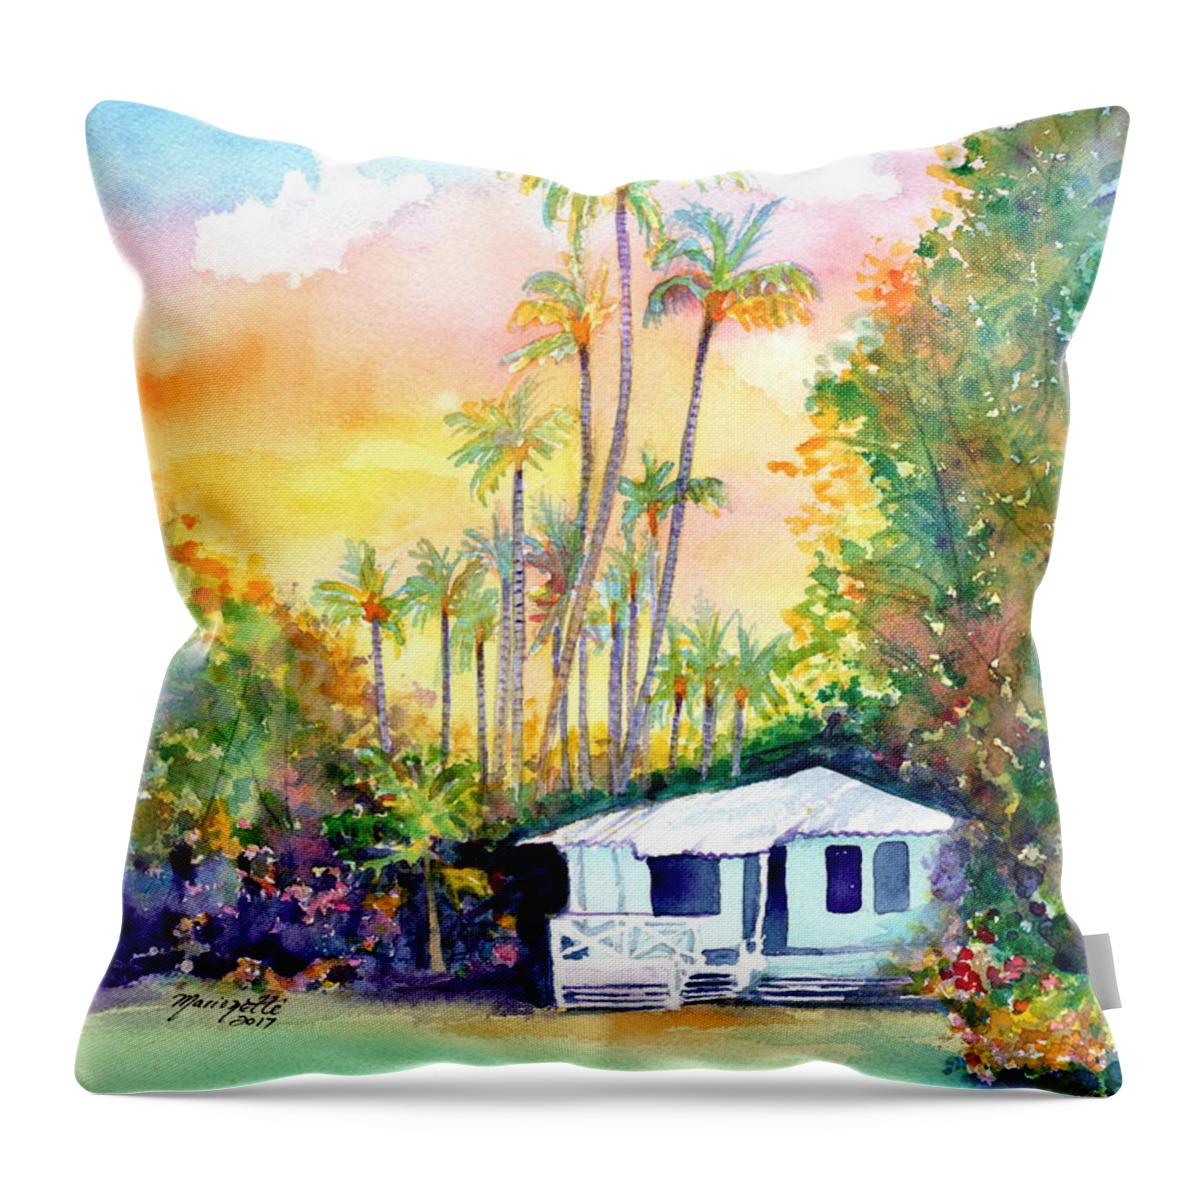 Prints Throw Pillow featuring the painting Dreams of Kauai 3 by Marionette Taboniar